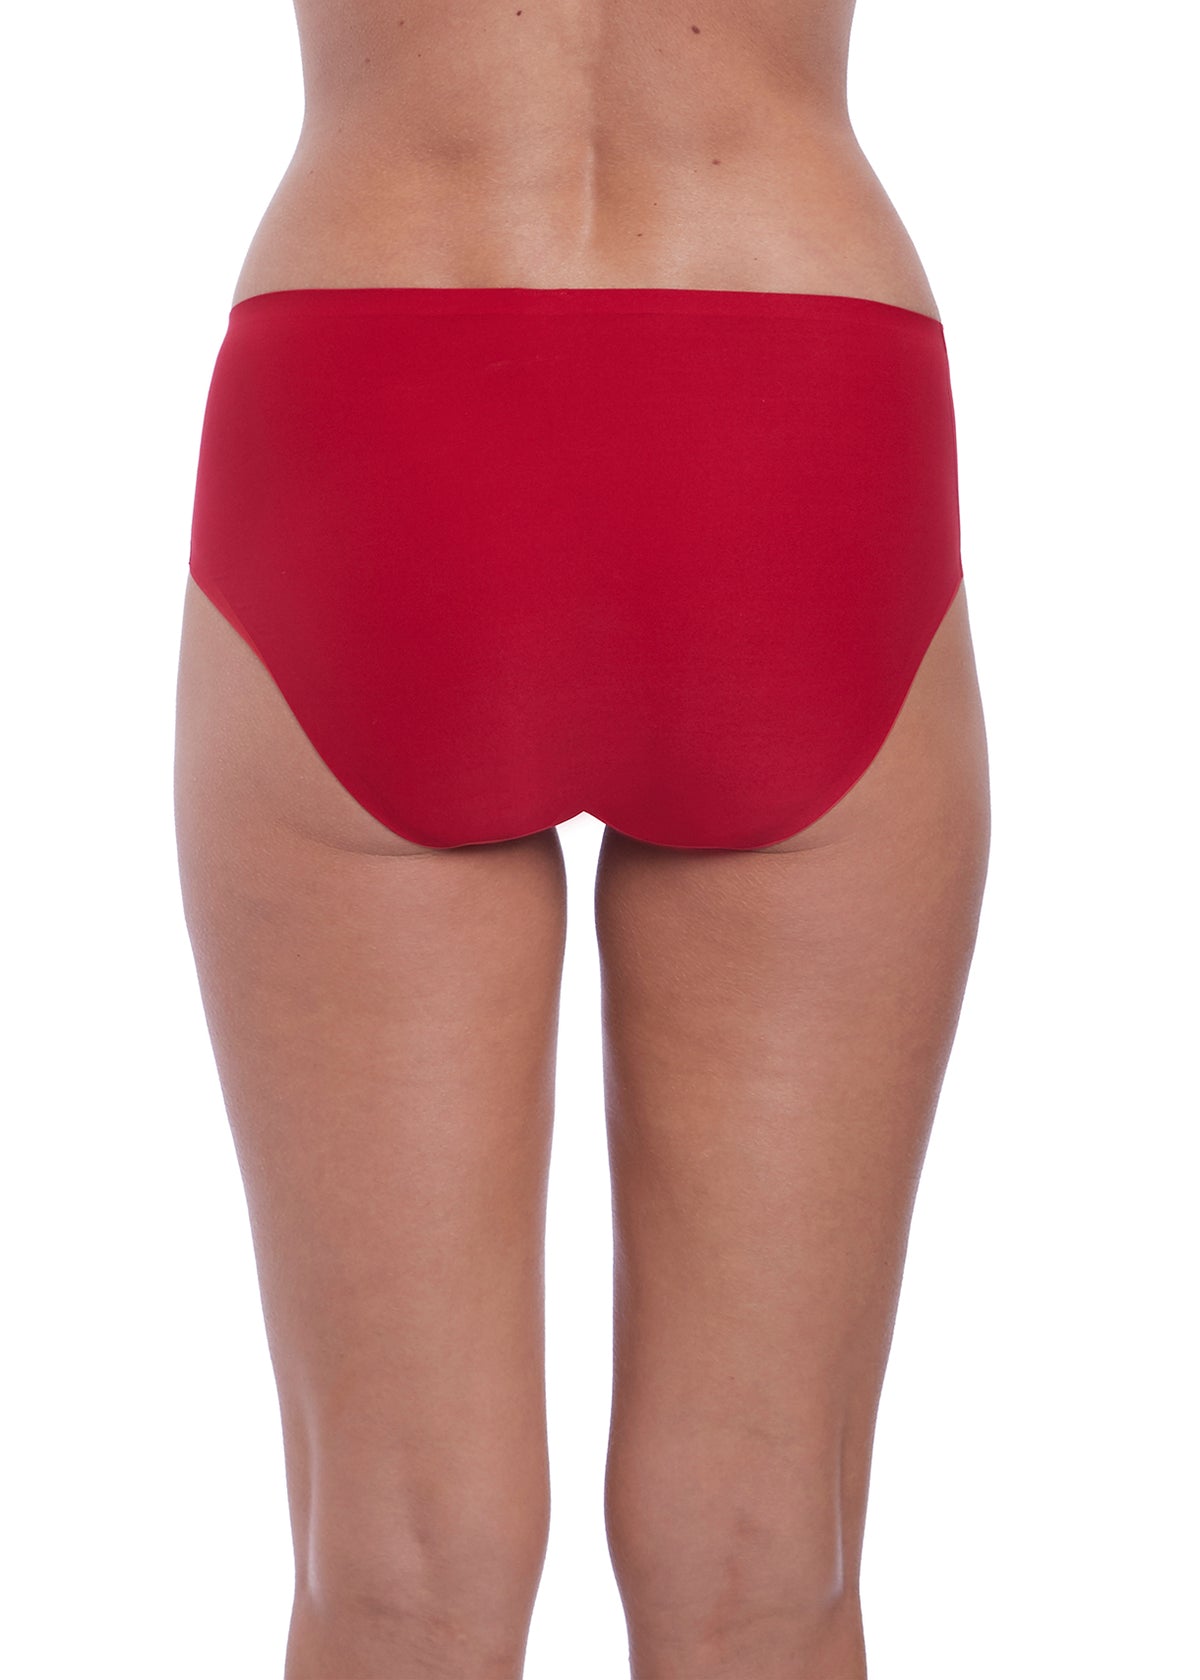 Smoothease Mid Brief One Size in red worn by model back view